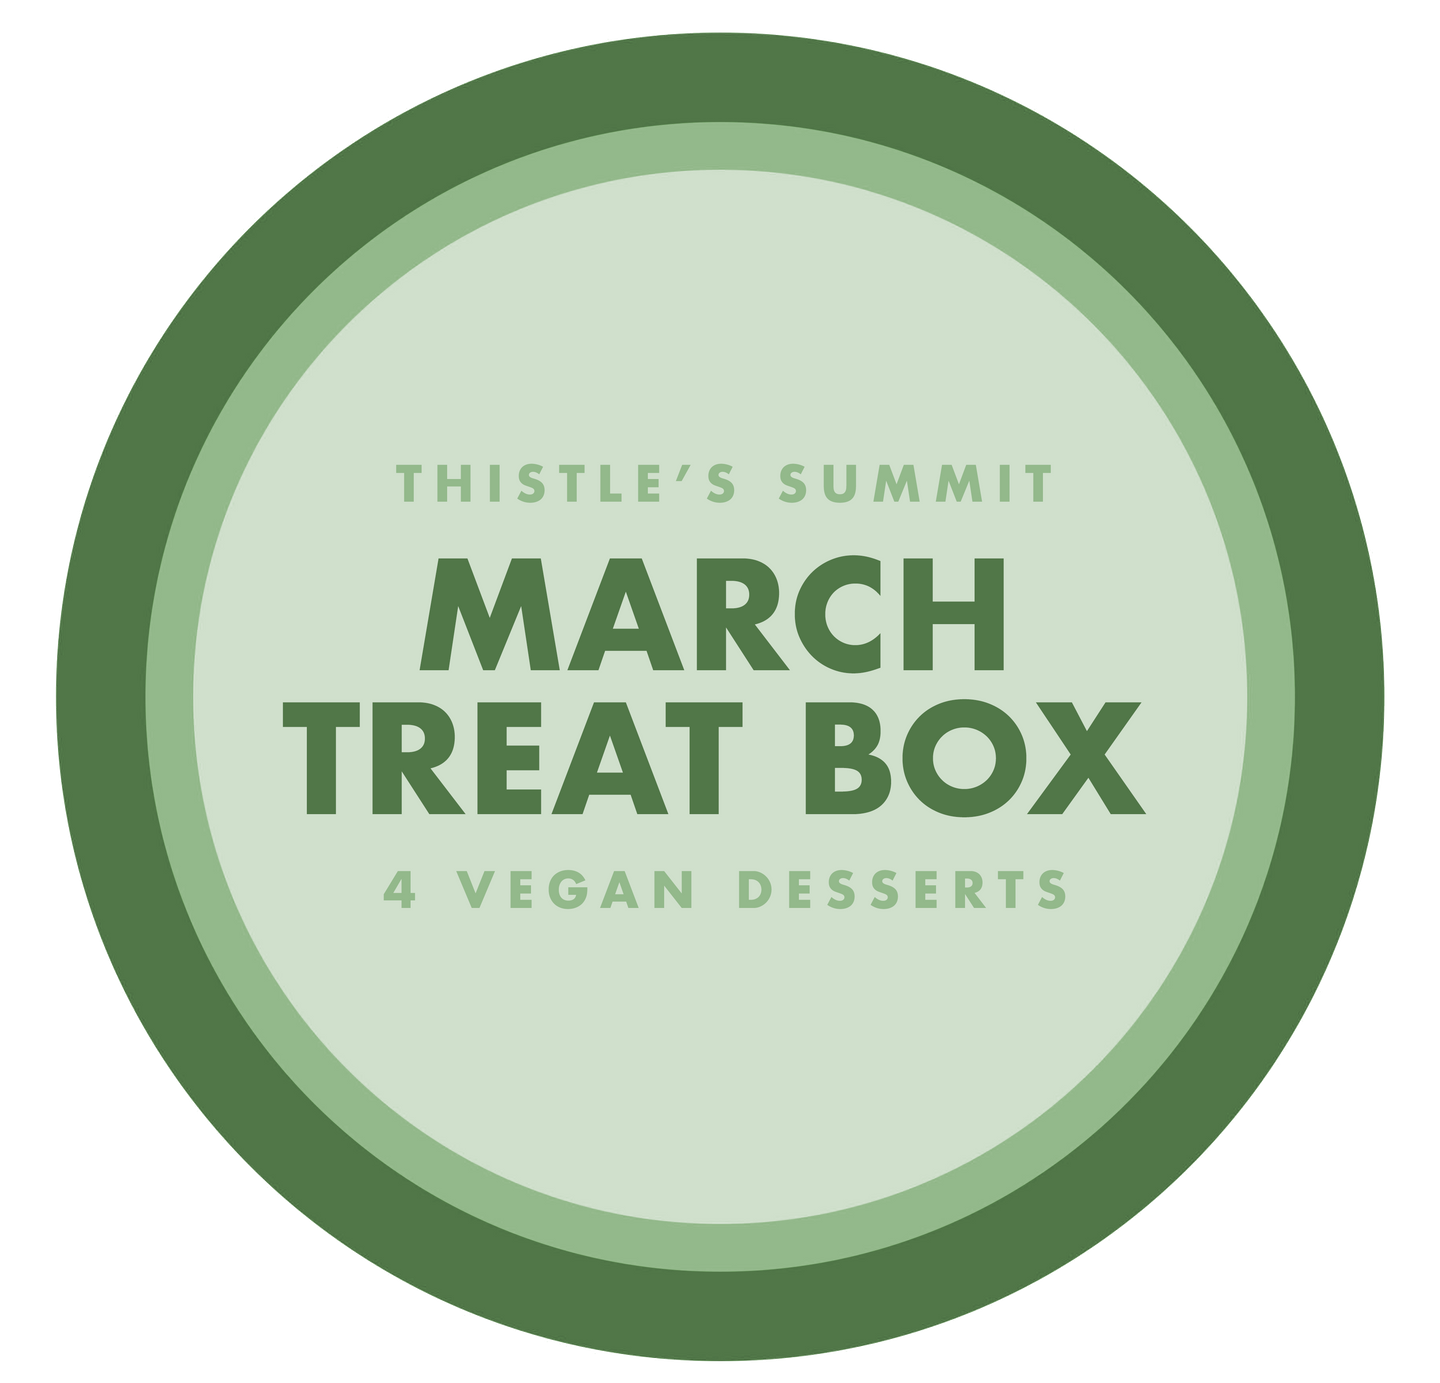 March Treat Box from Thistle's Summit